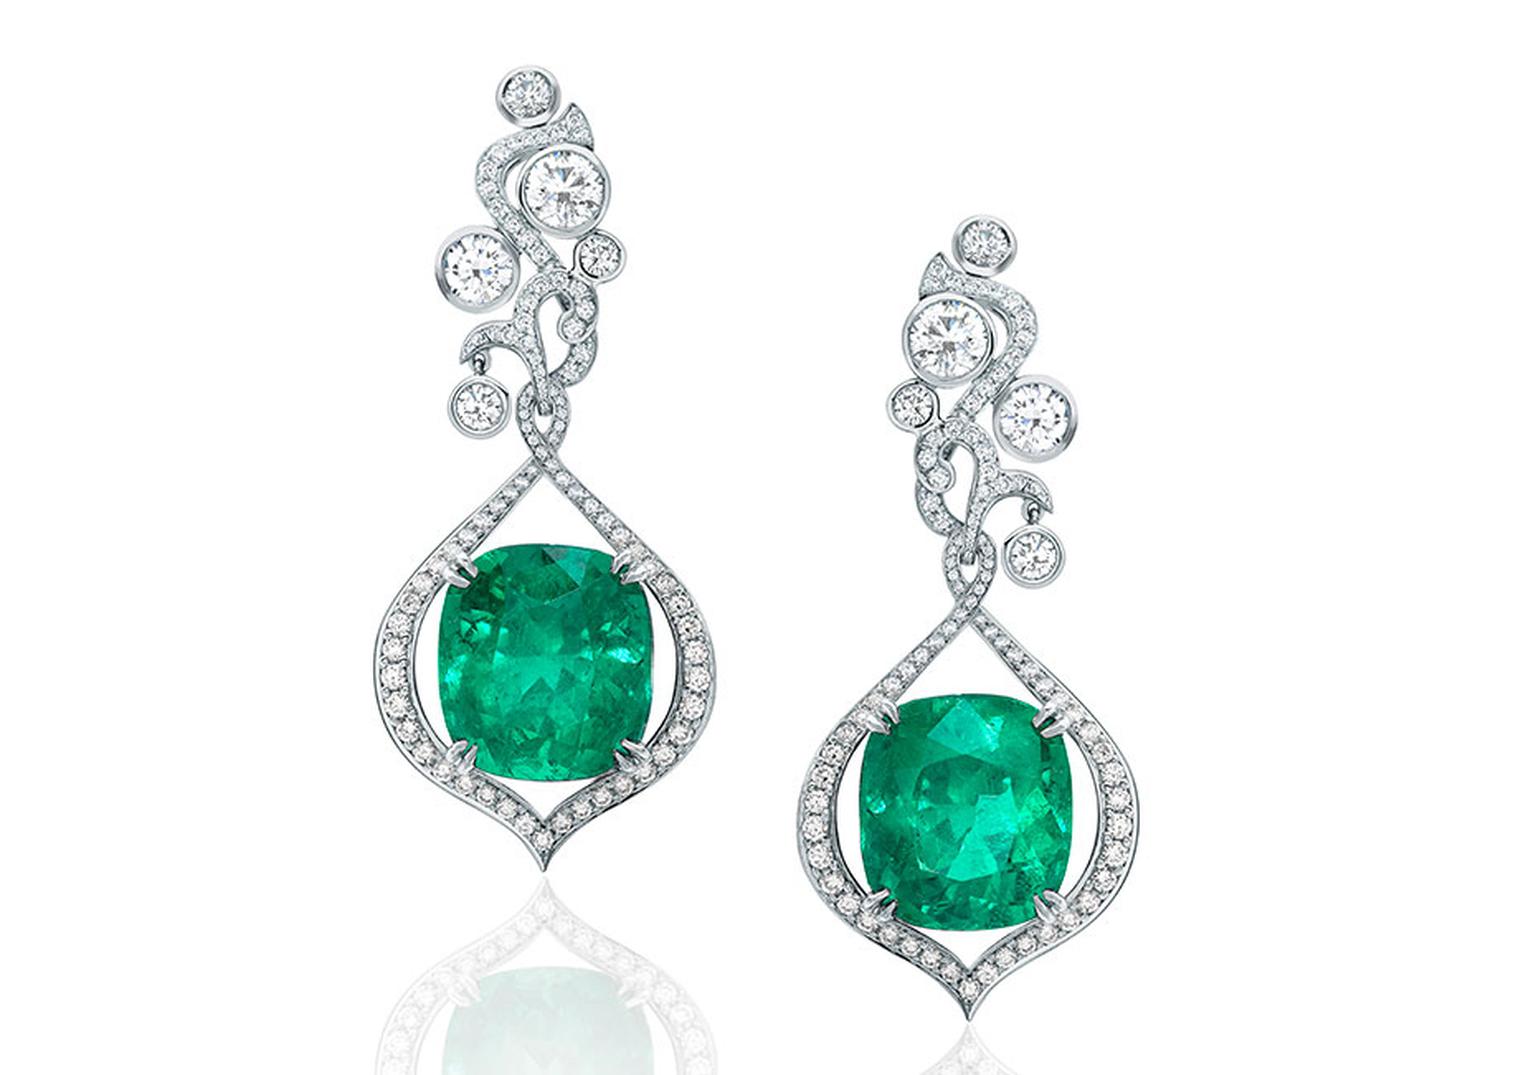 Boodles Greenfire emerald earrings, accentuated by pavé